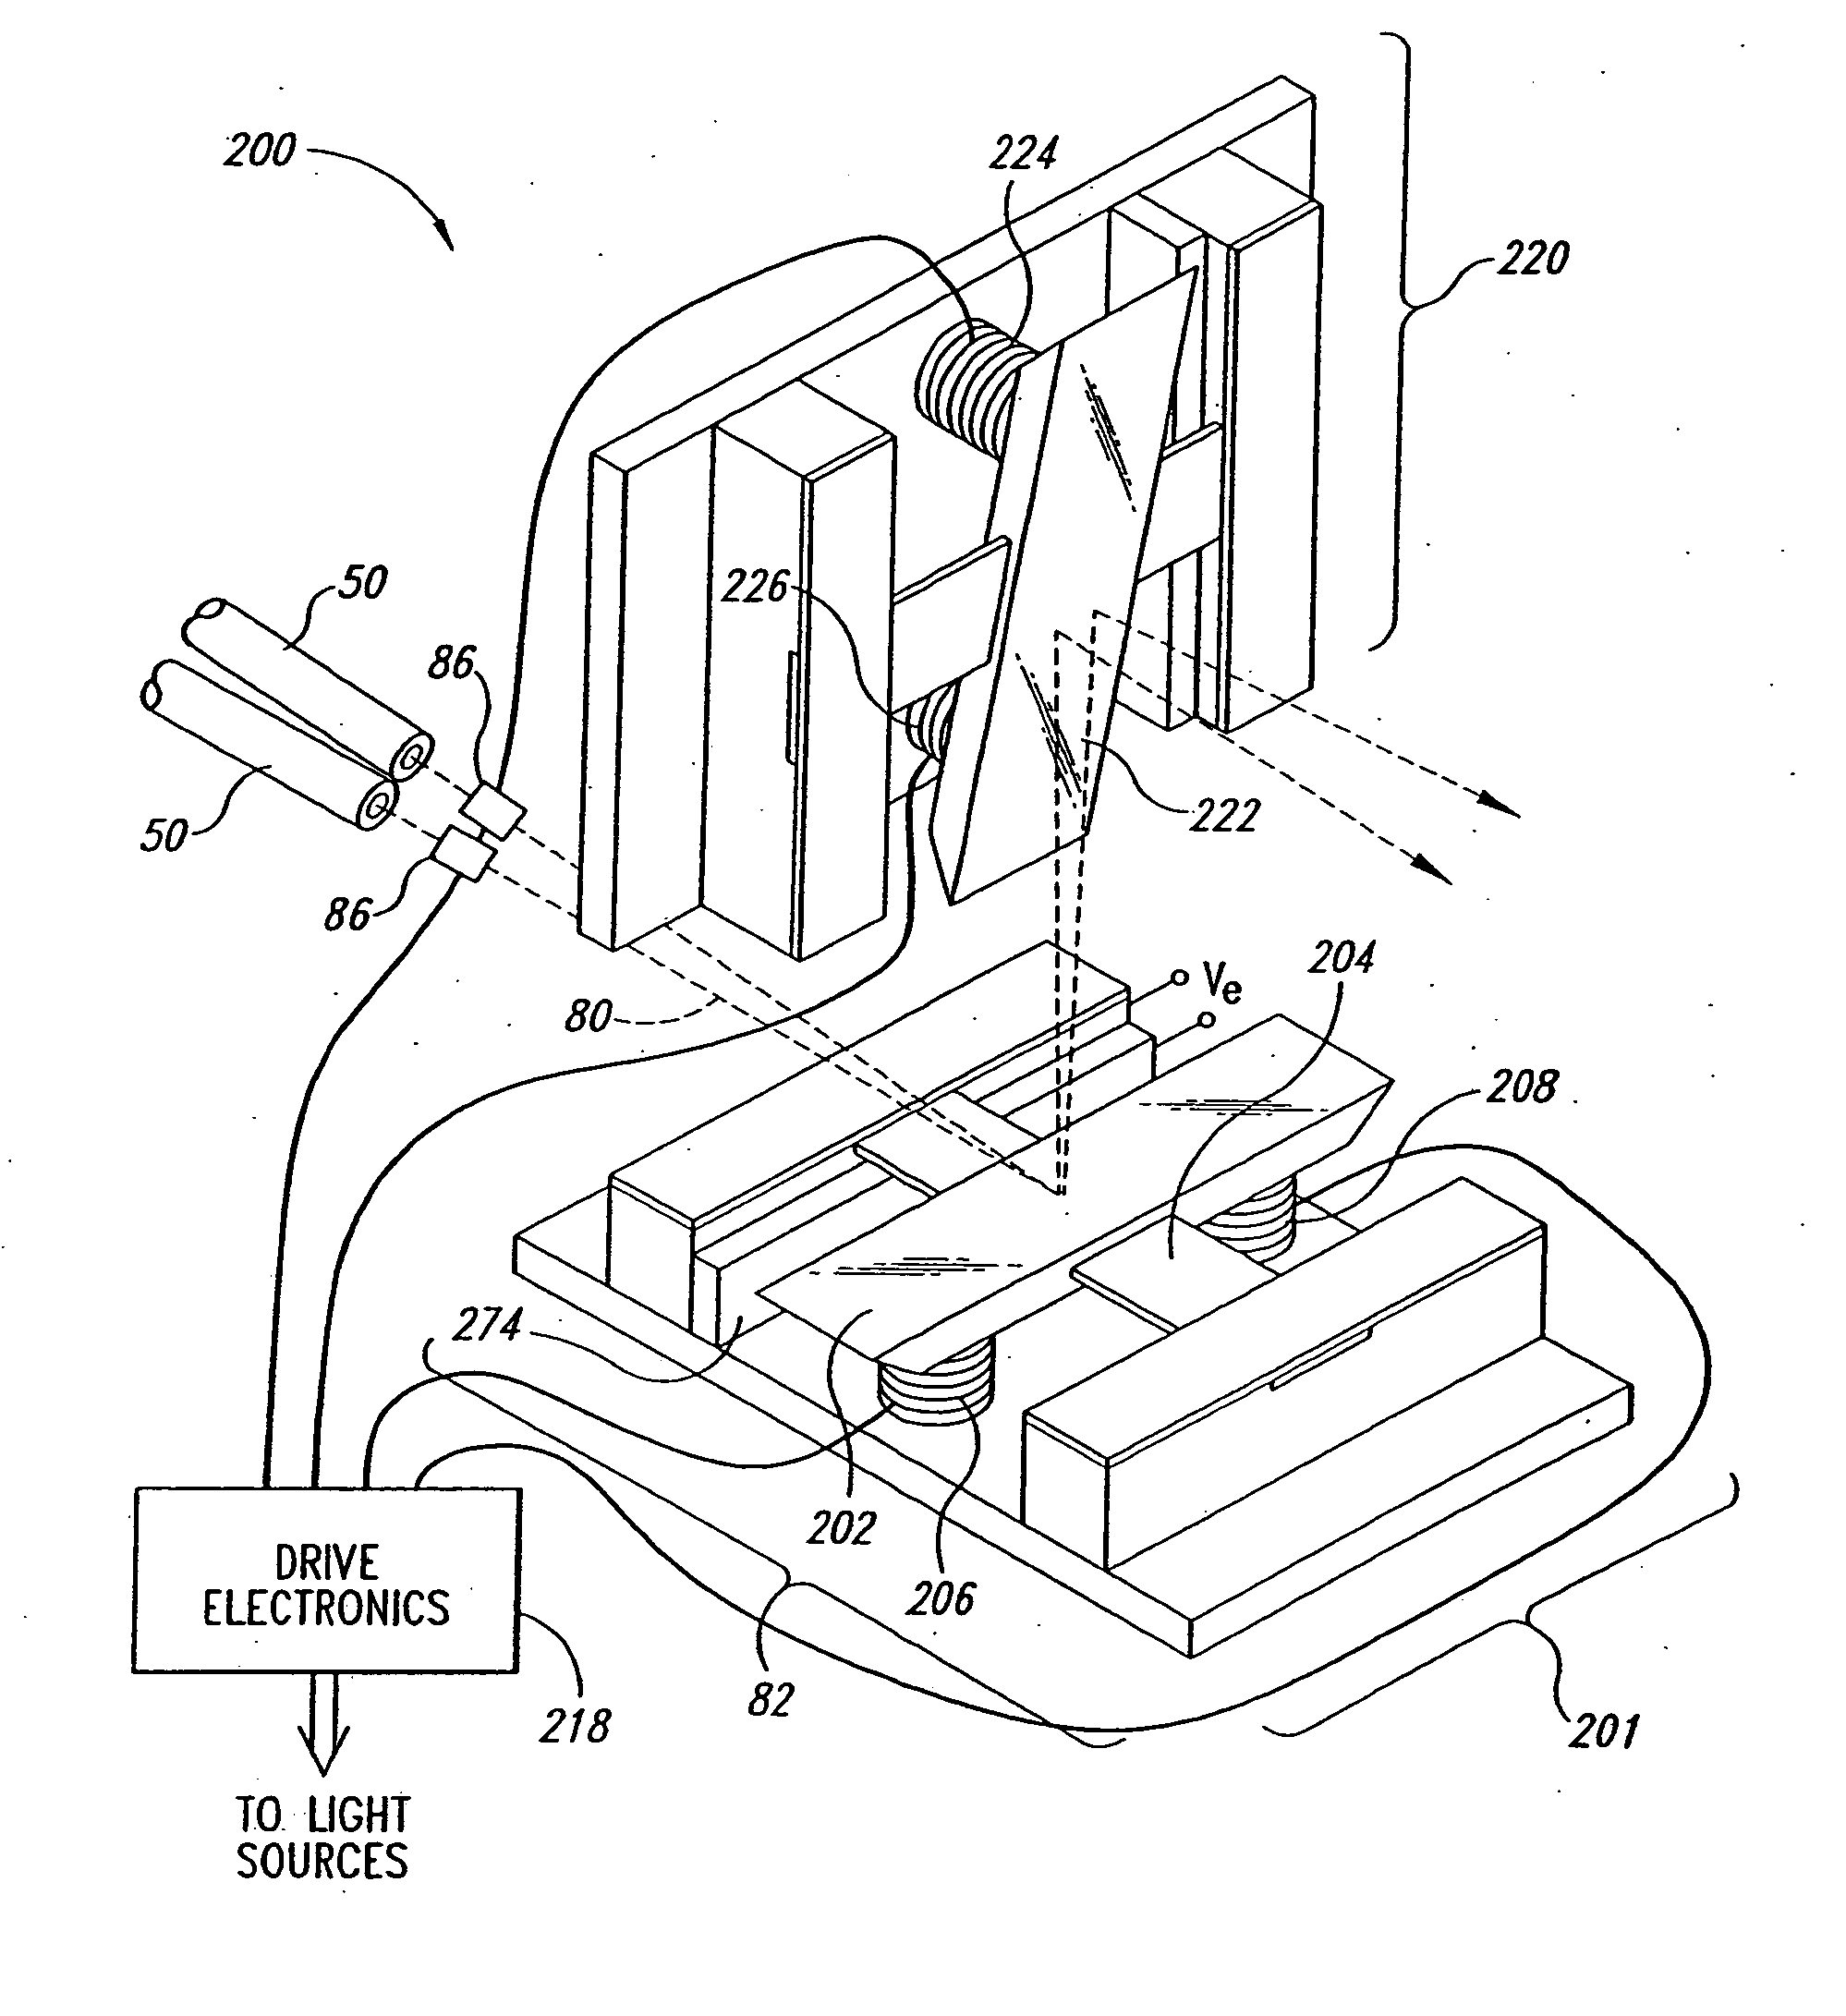 Frequency tunable resonant scanner with auxiliary arms